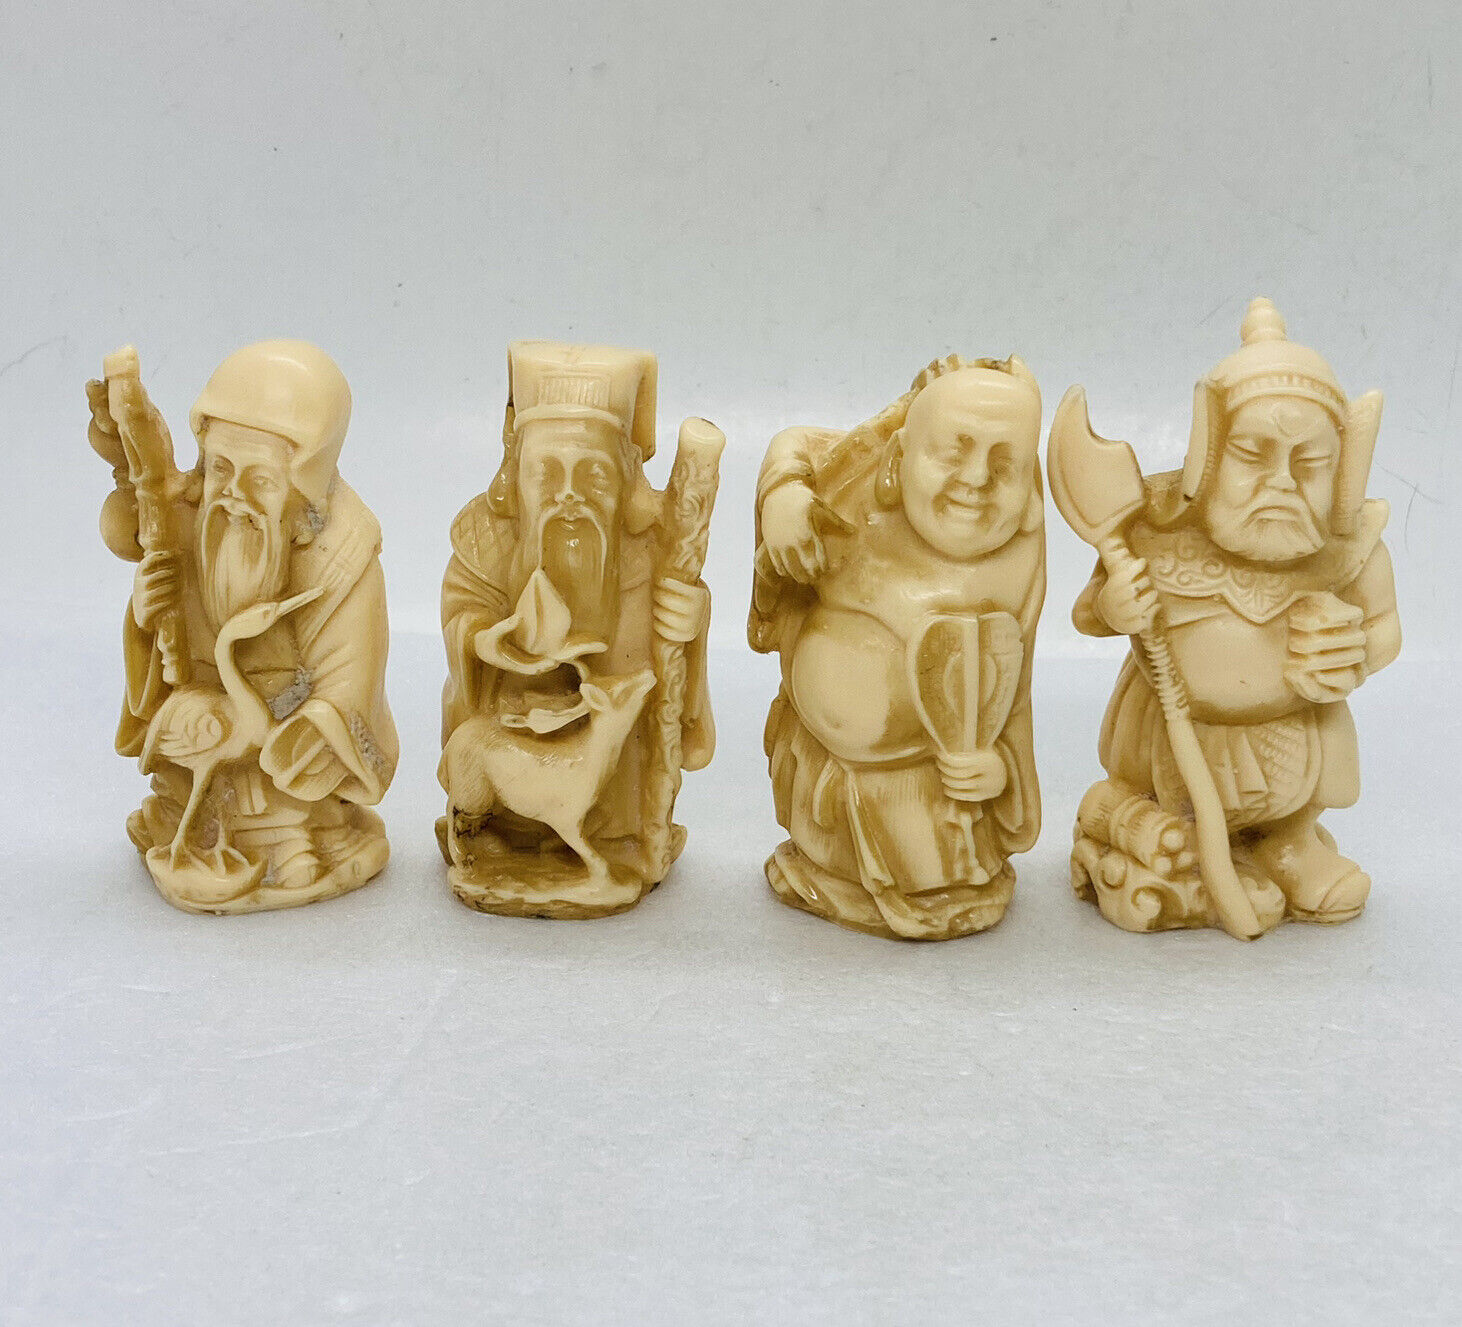 Vintage Chinese Four Gods Resin Figurine Prosperity Luck Peace Protection Art BB